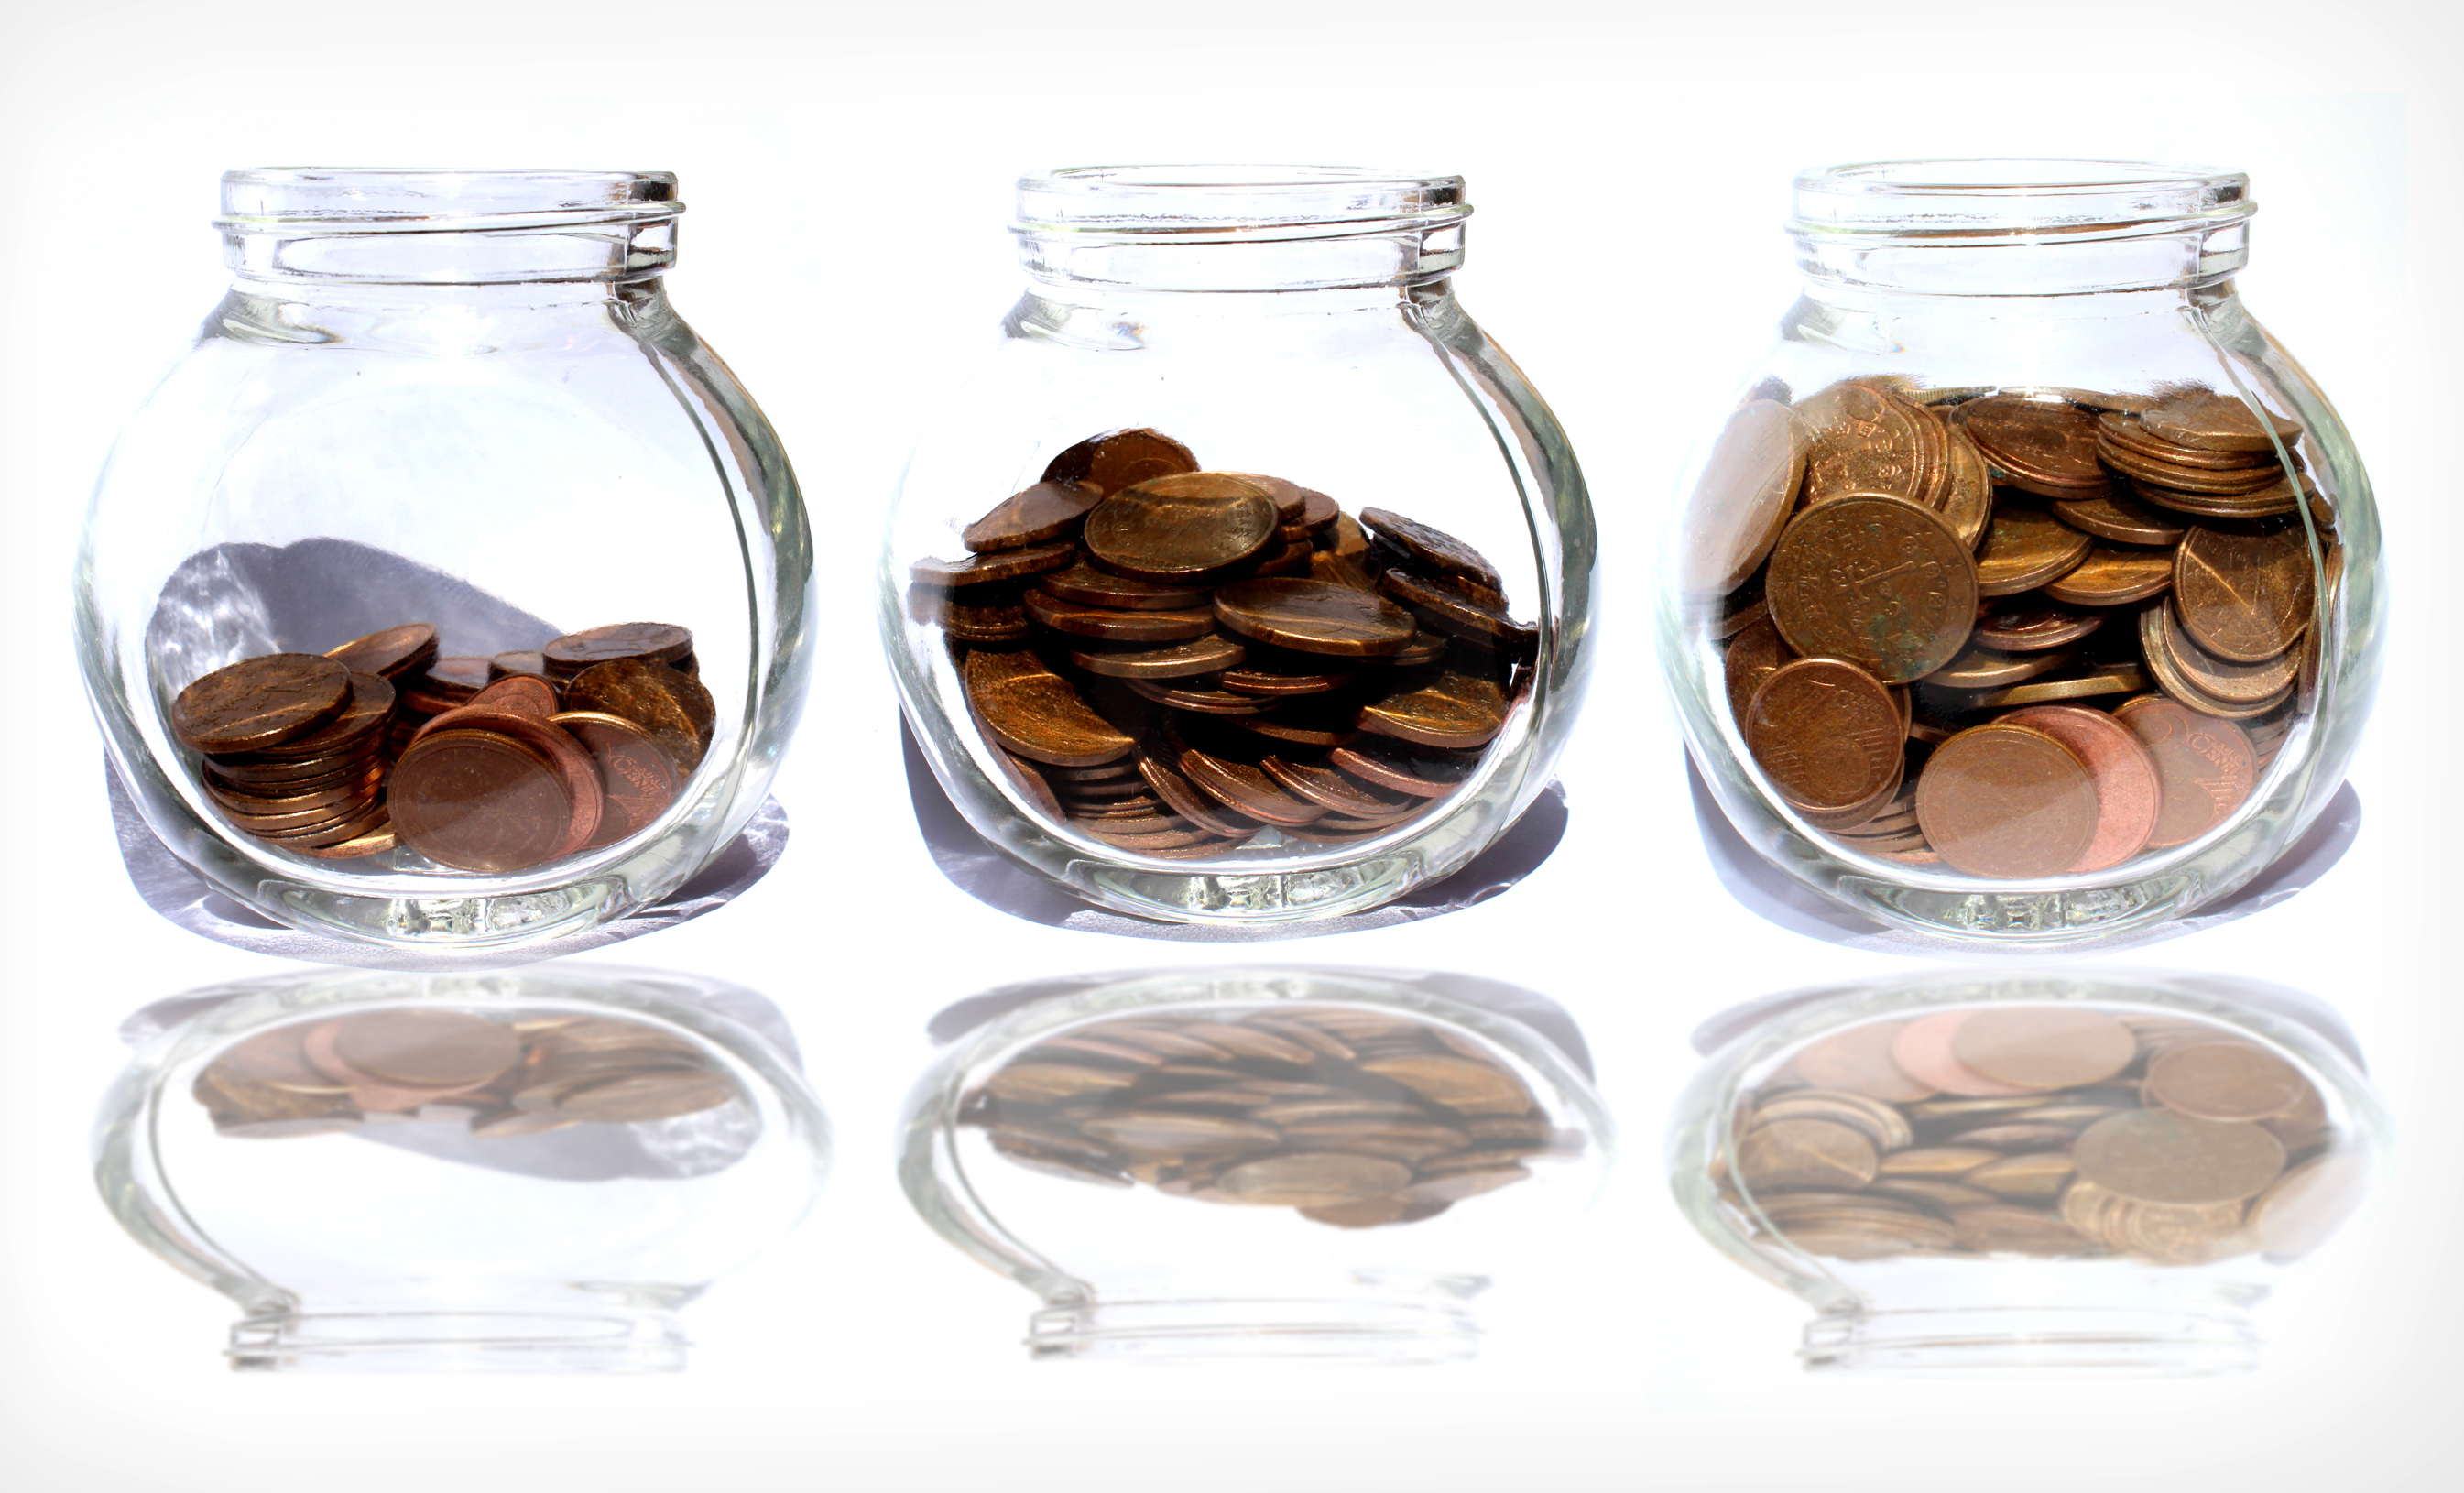 Coins in the jar - Savings, Assets, Money, Penny, Payment, HQ Photo